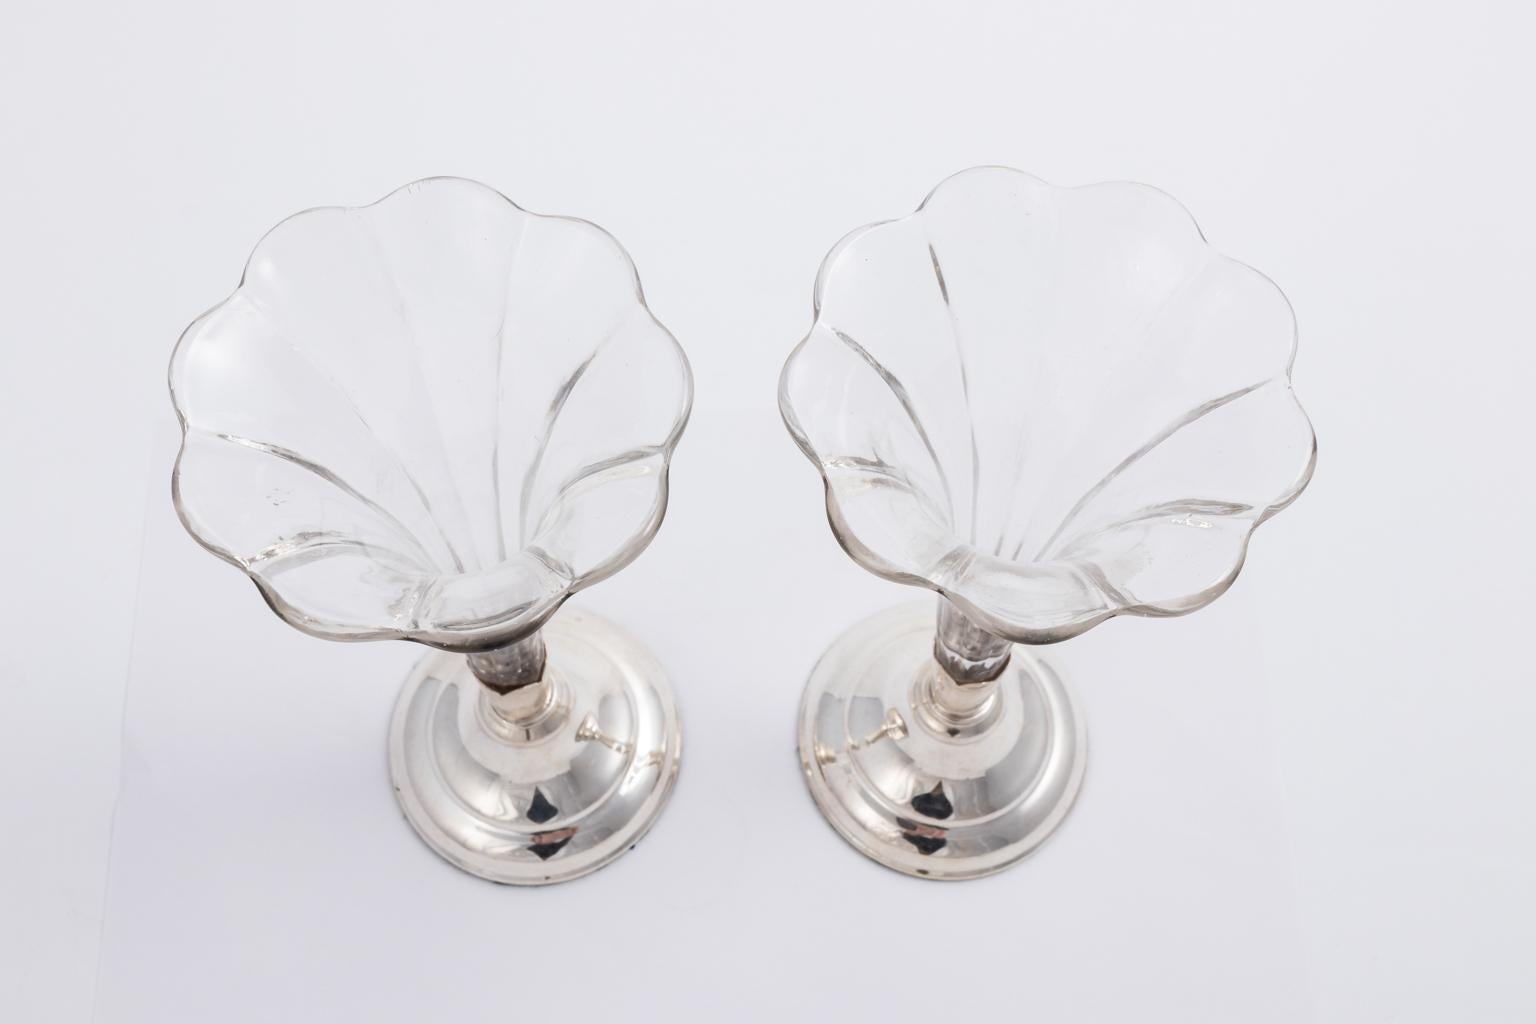 Pair of English glass fluted vases in silver plate stands, circa 1930s.